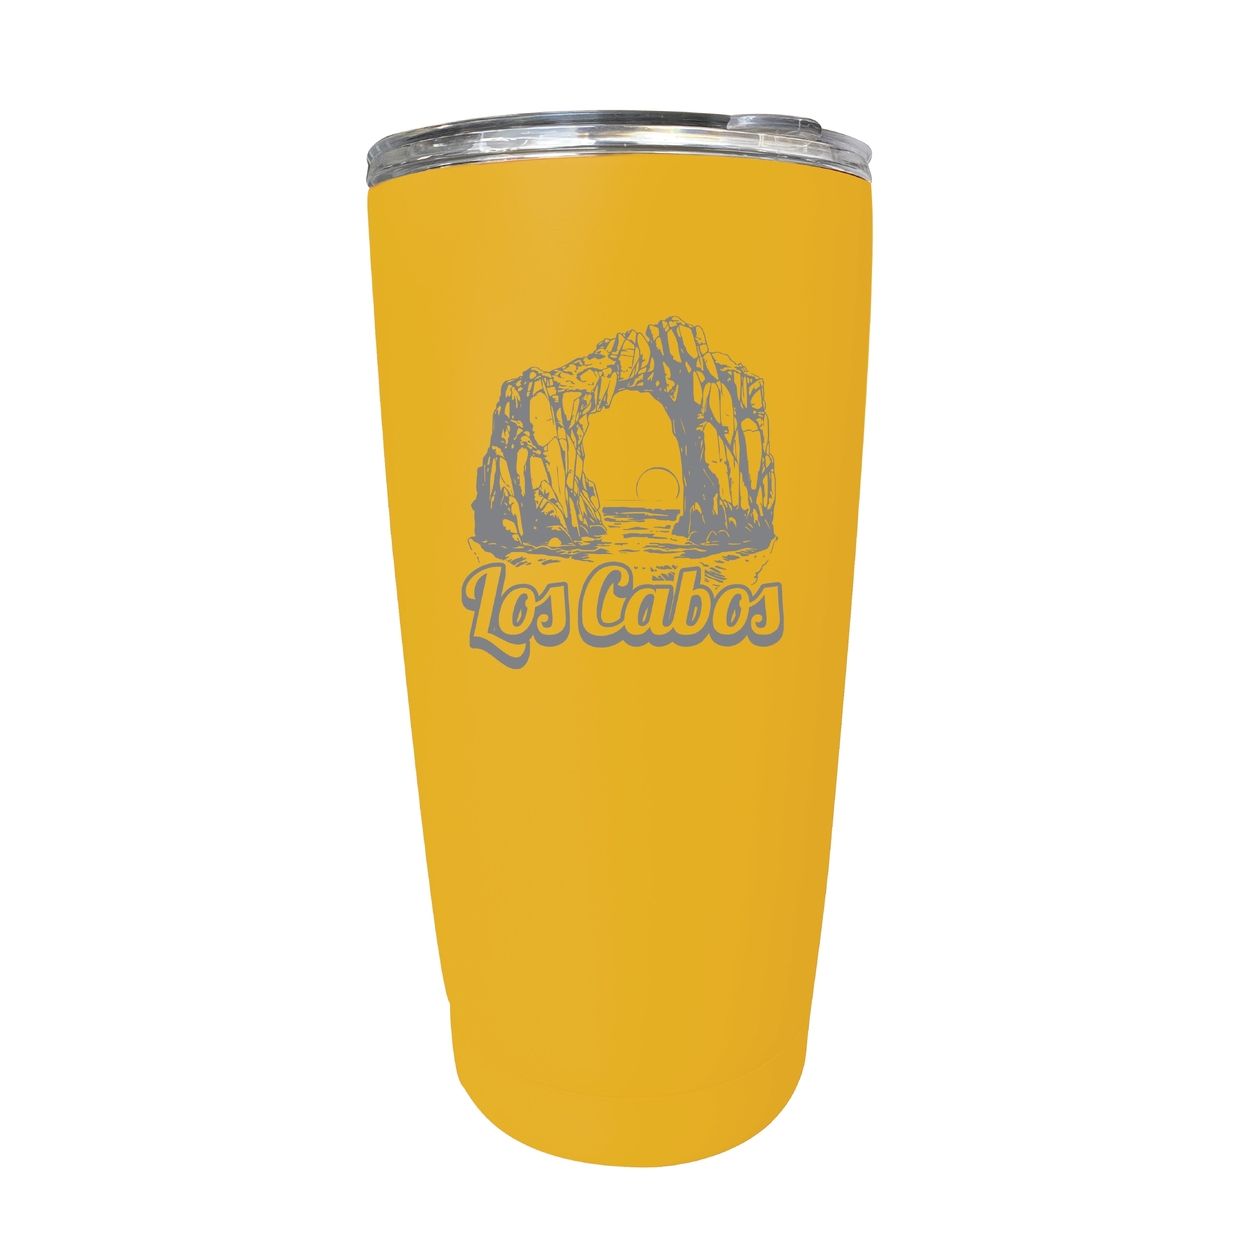 Los Cabos Mexico Souvenir 16 Oz Engraved Stainless Steel Insulated Tumbler - Yellow,,4-Pack